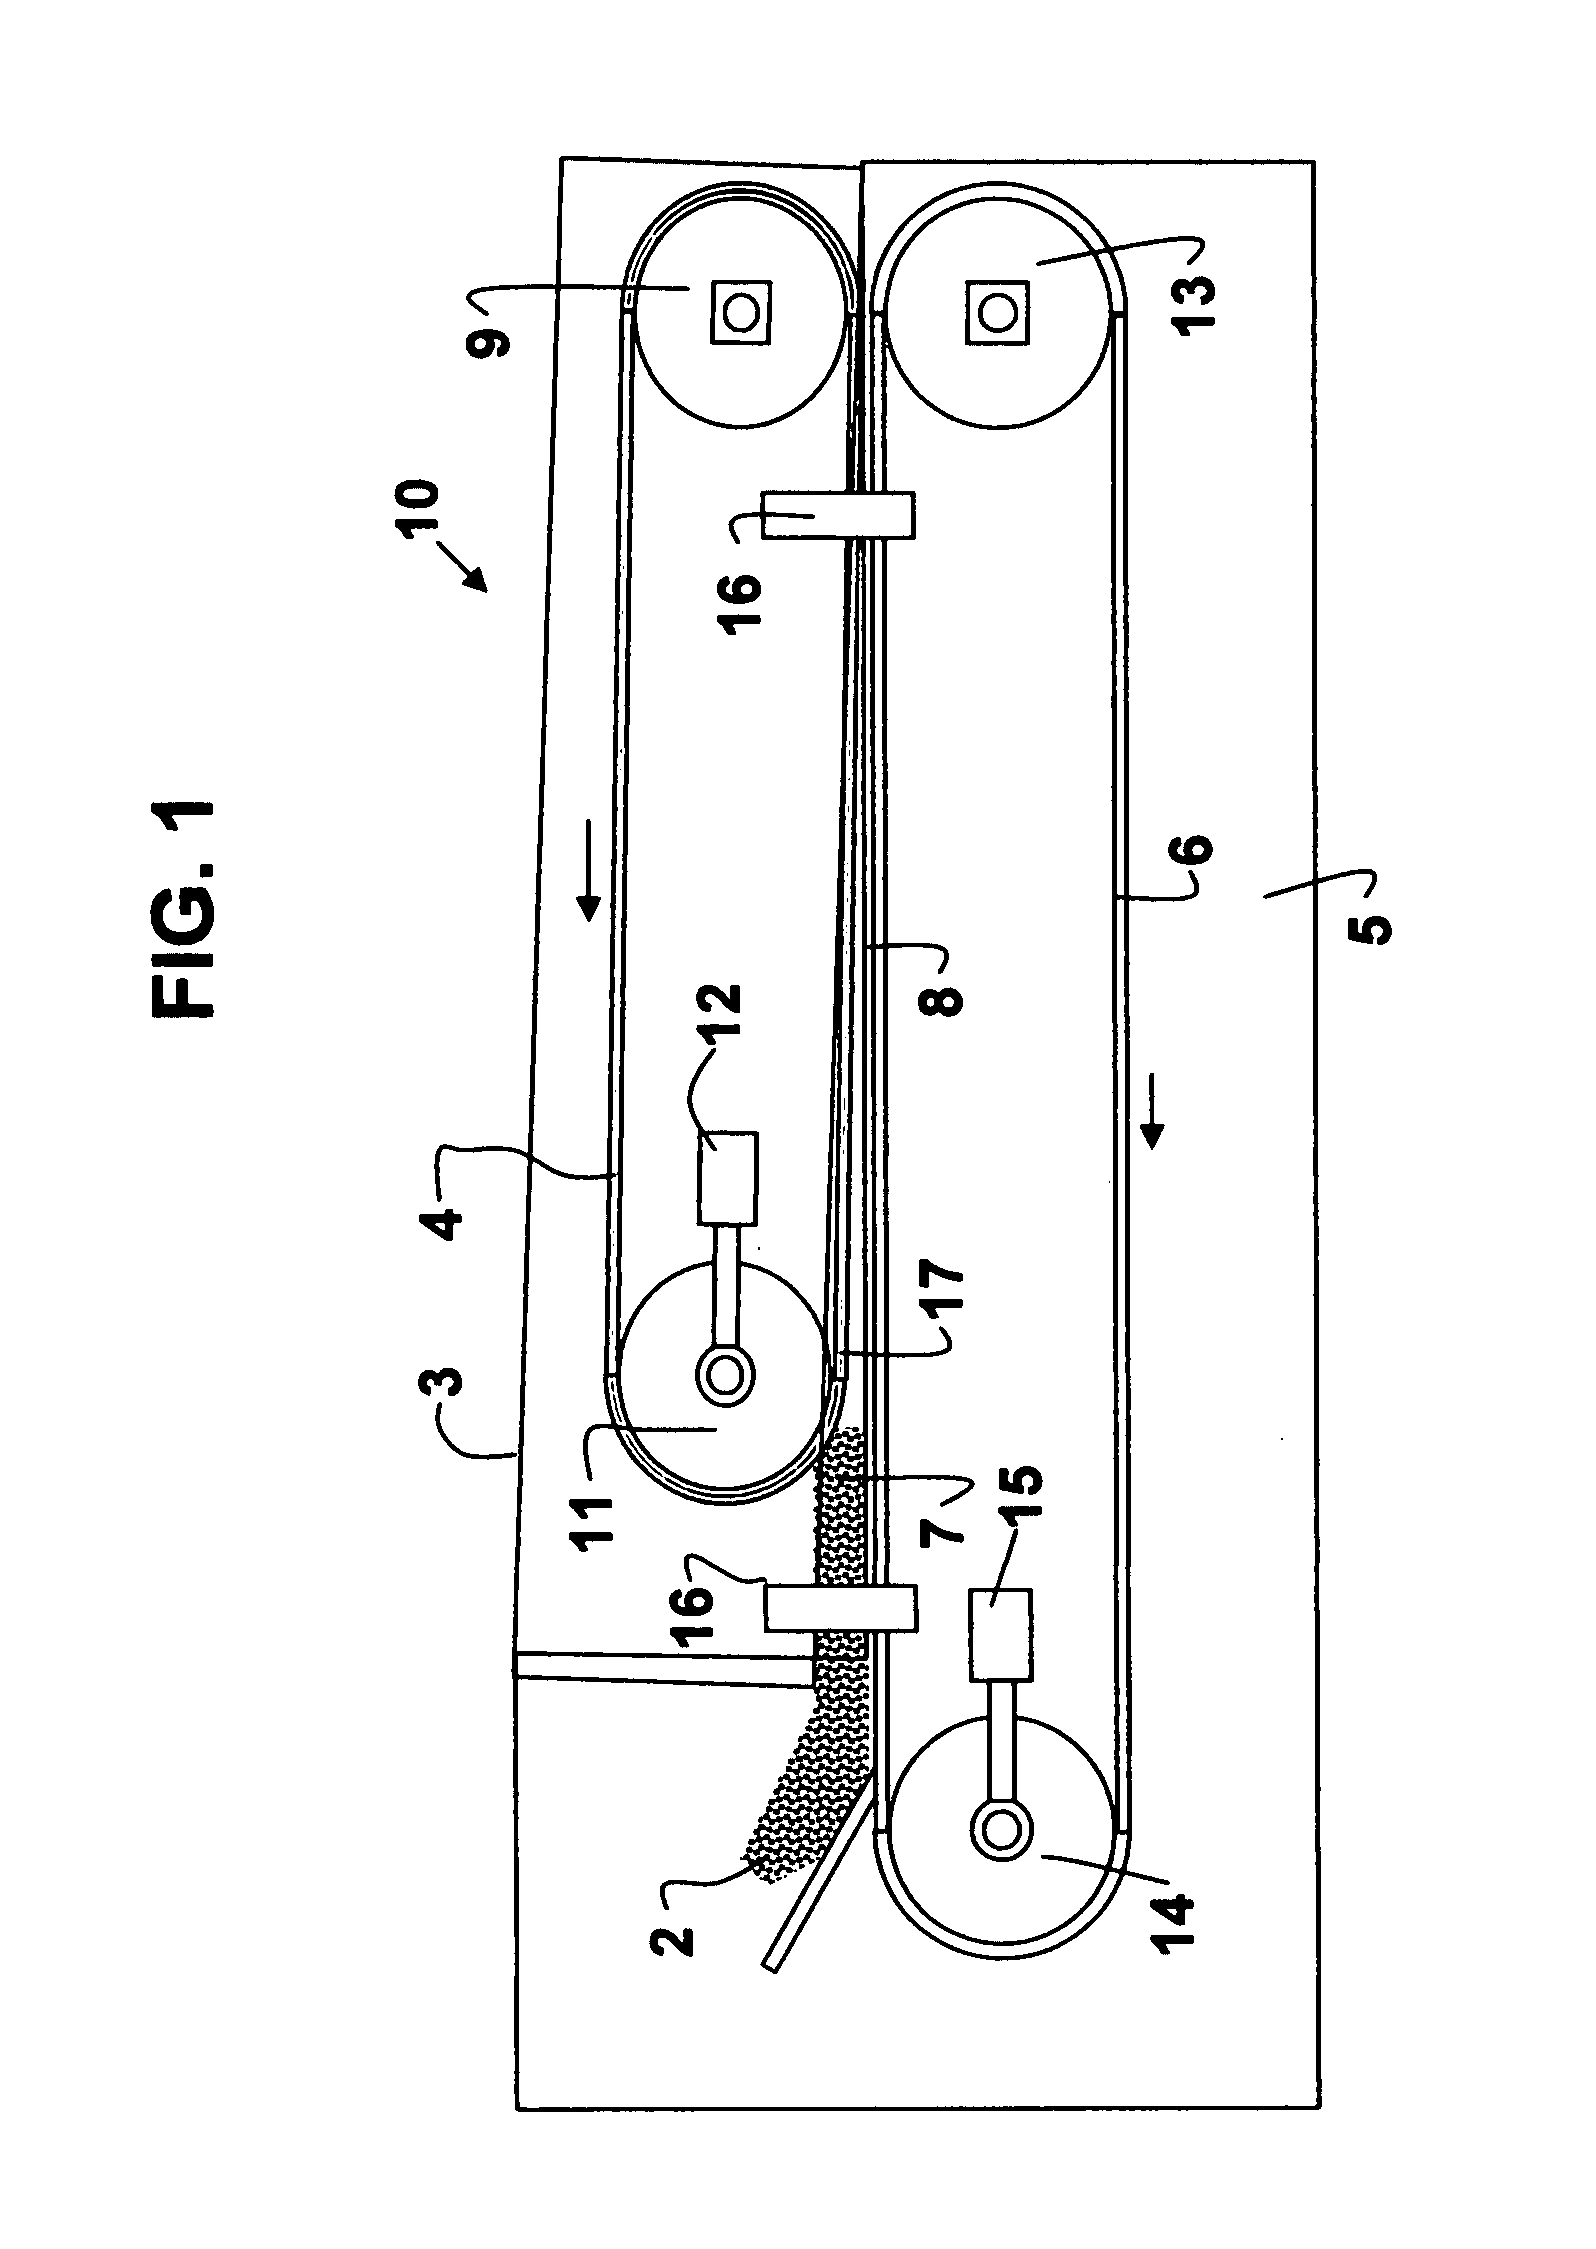 Belt press apparatus and method for high solids capture and high solids content